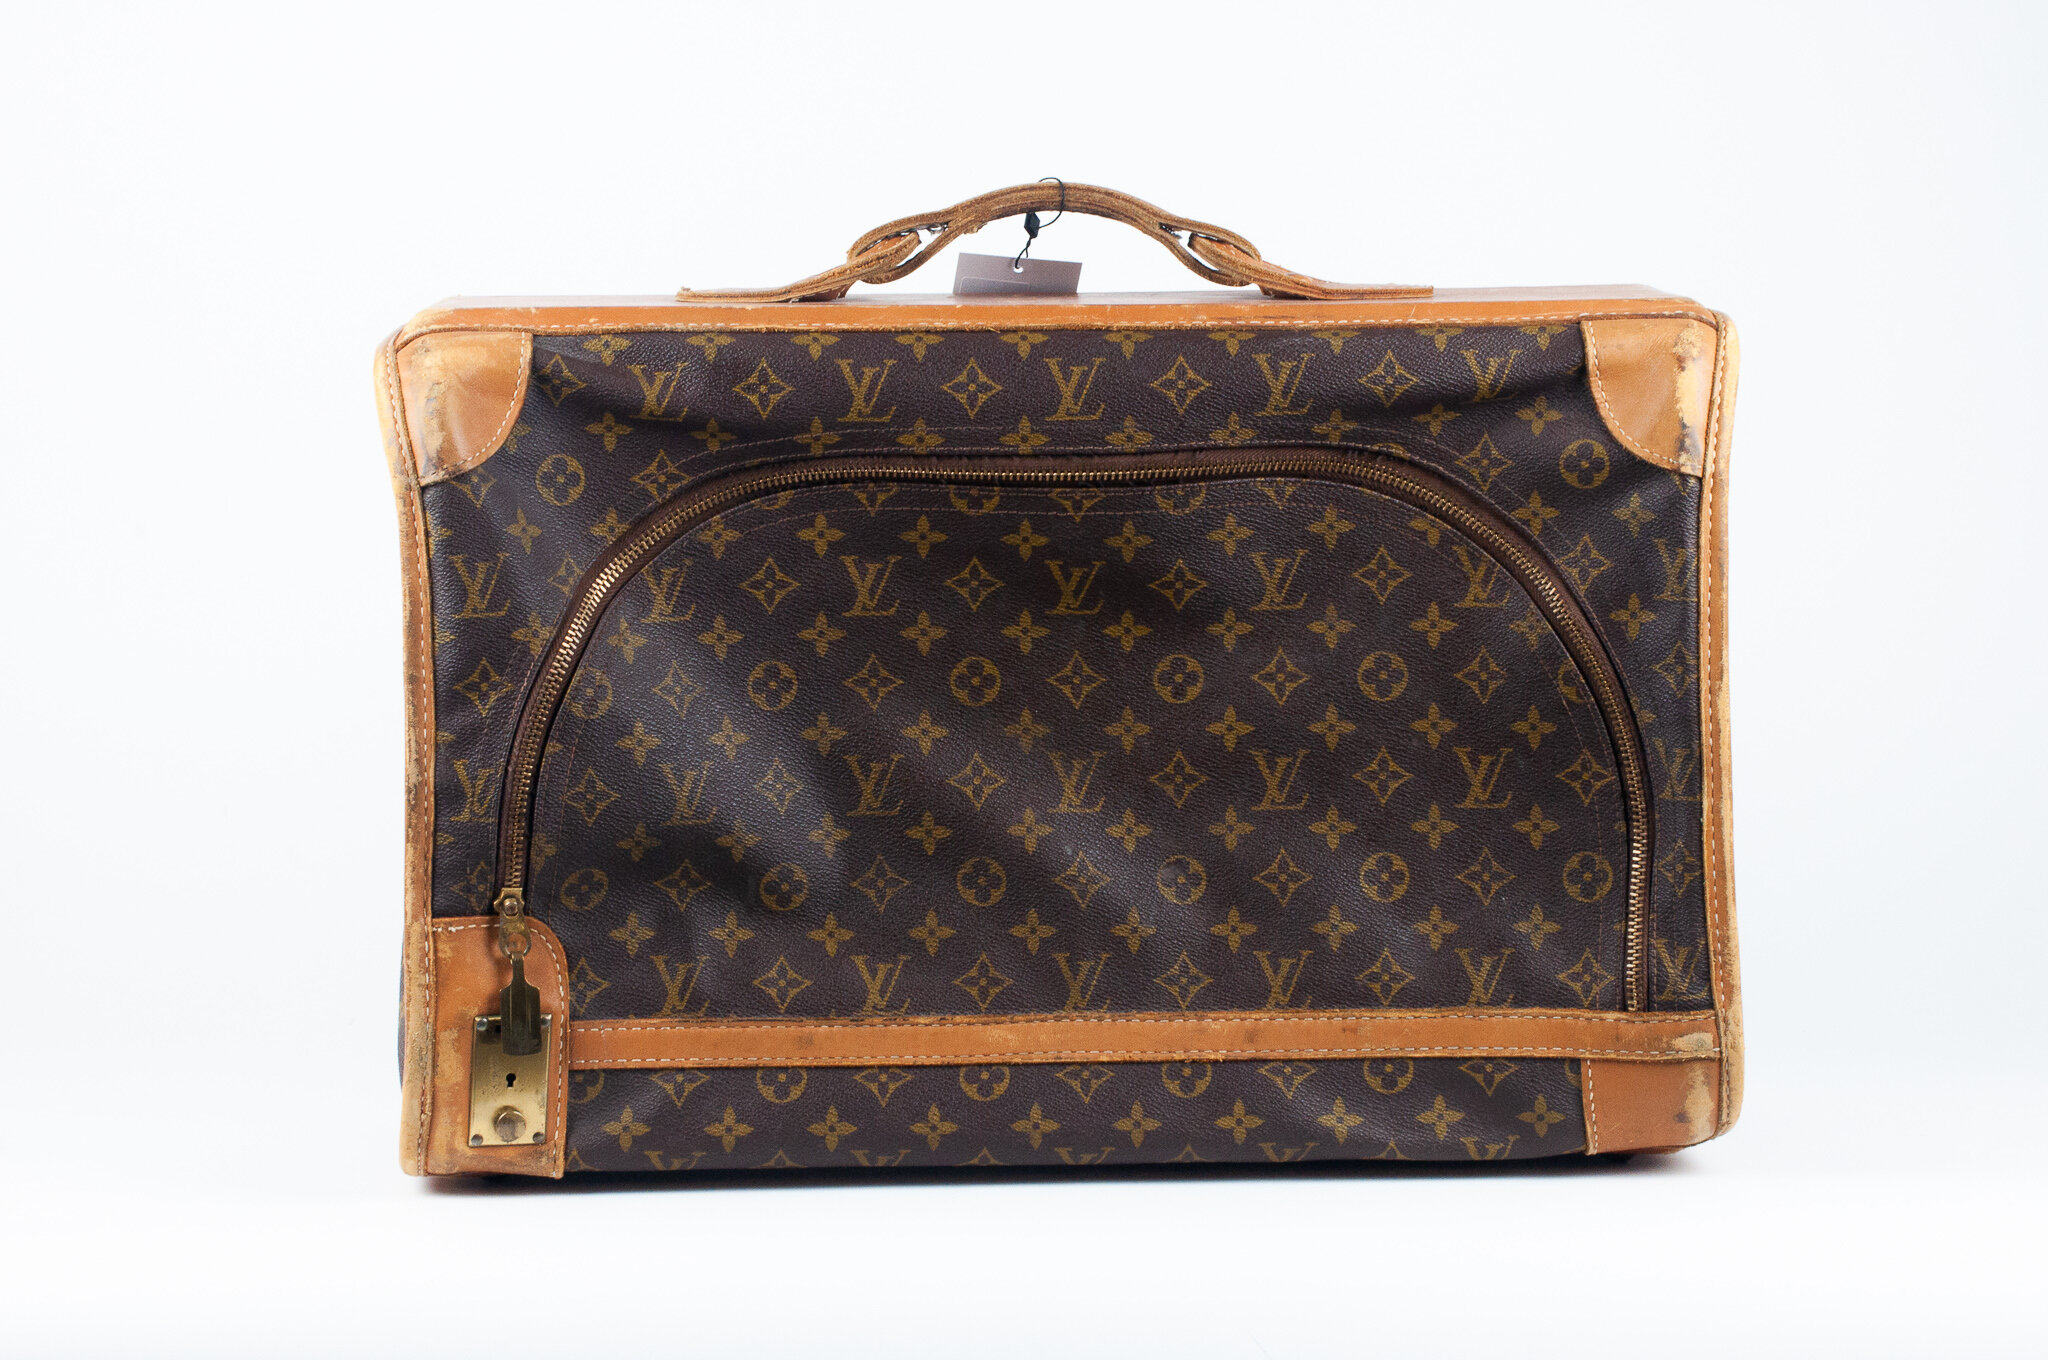 Vintage Louis Vuitton Suitcase from the 65-70s